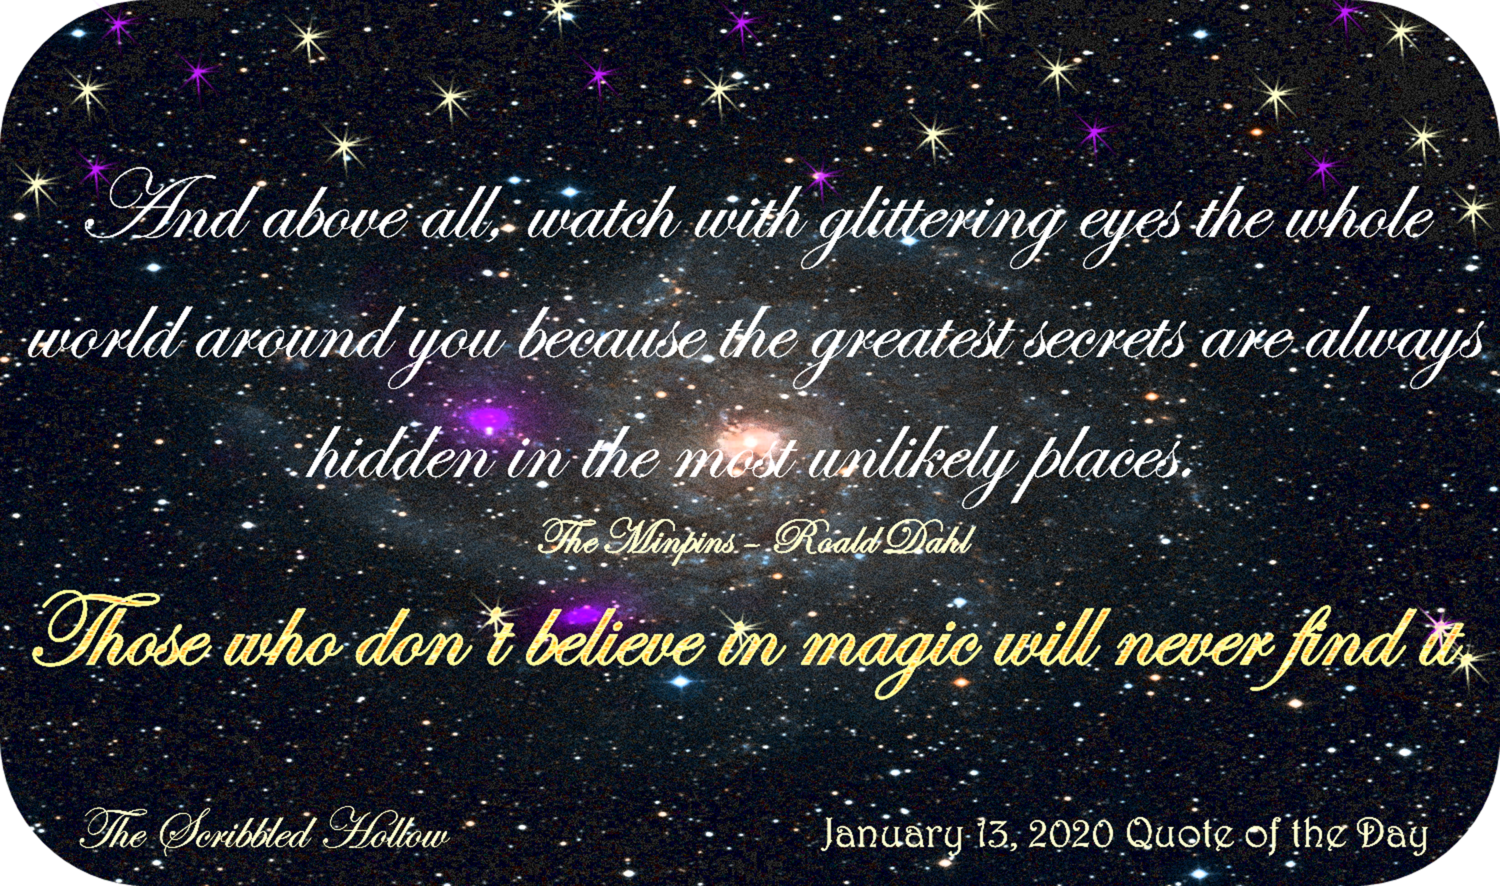 Those who don't believe in magic Magnet - Jan 13th Quote